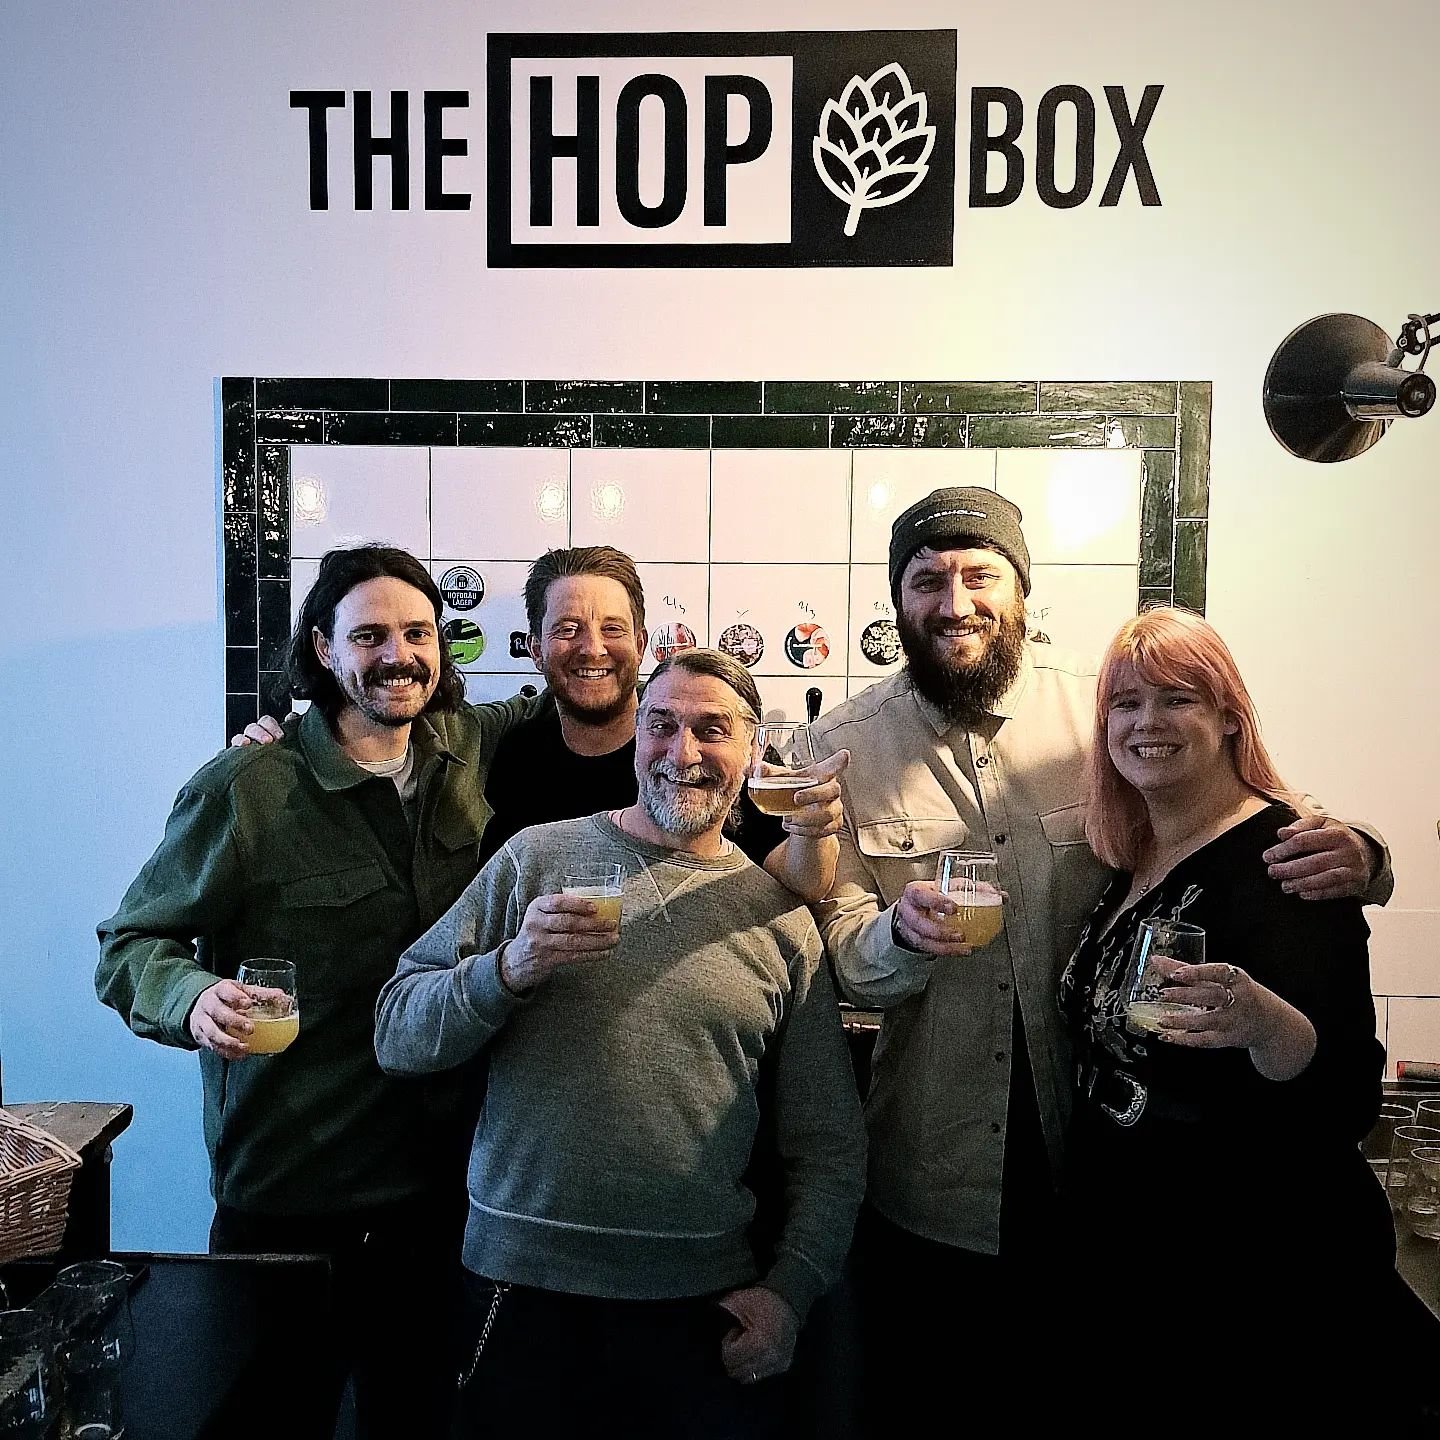 A wonderful evening was had with our new pals from @glasshousebeerco. Josh and Mitch came down from Birmingham to share their beer and tell us their story.

What strikes you is the heritage and authenticity that underpins their work. This results in 